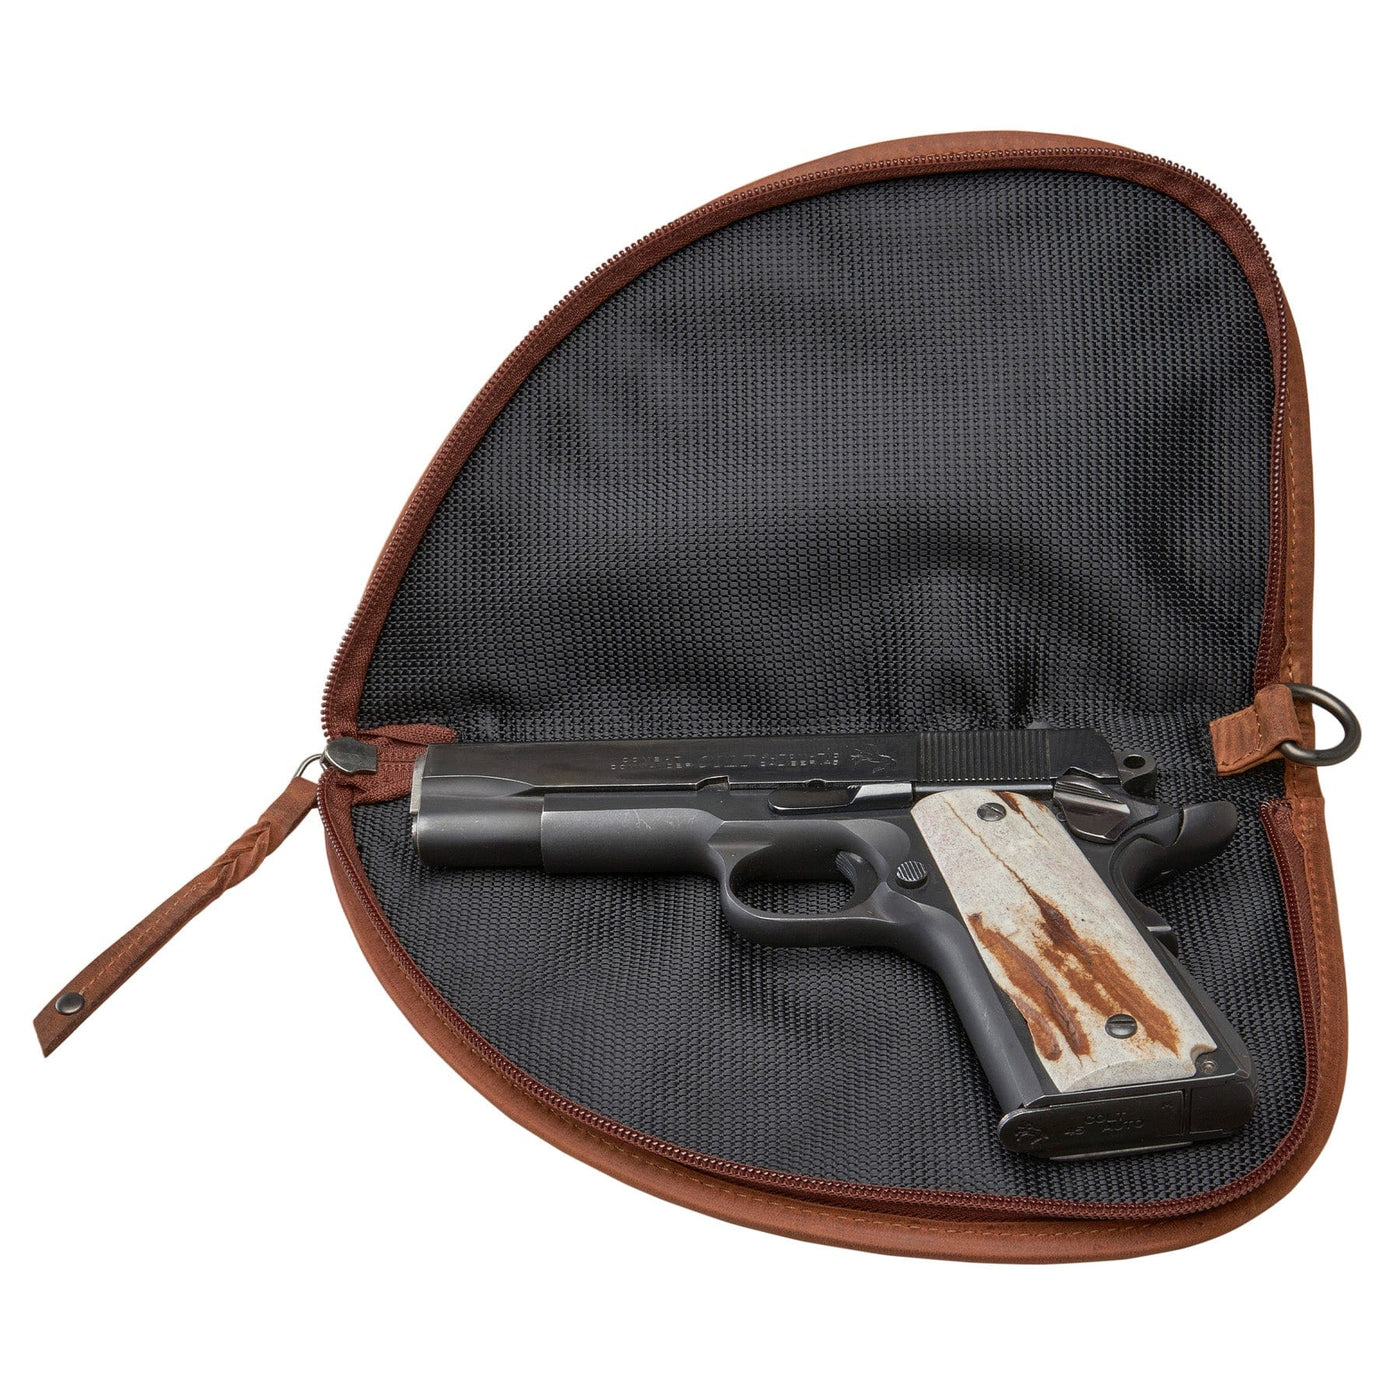 Lady Conceal Unisex Genuine Leather Gun Cases